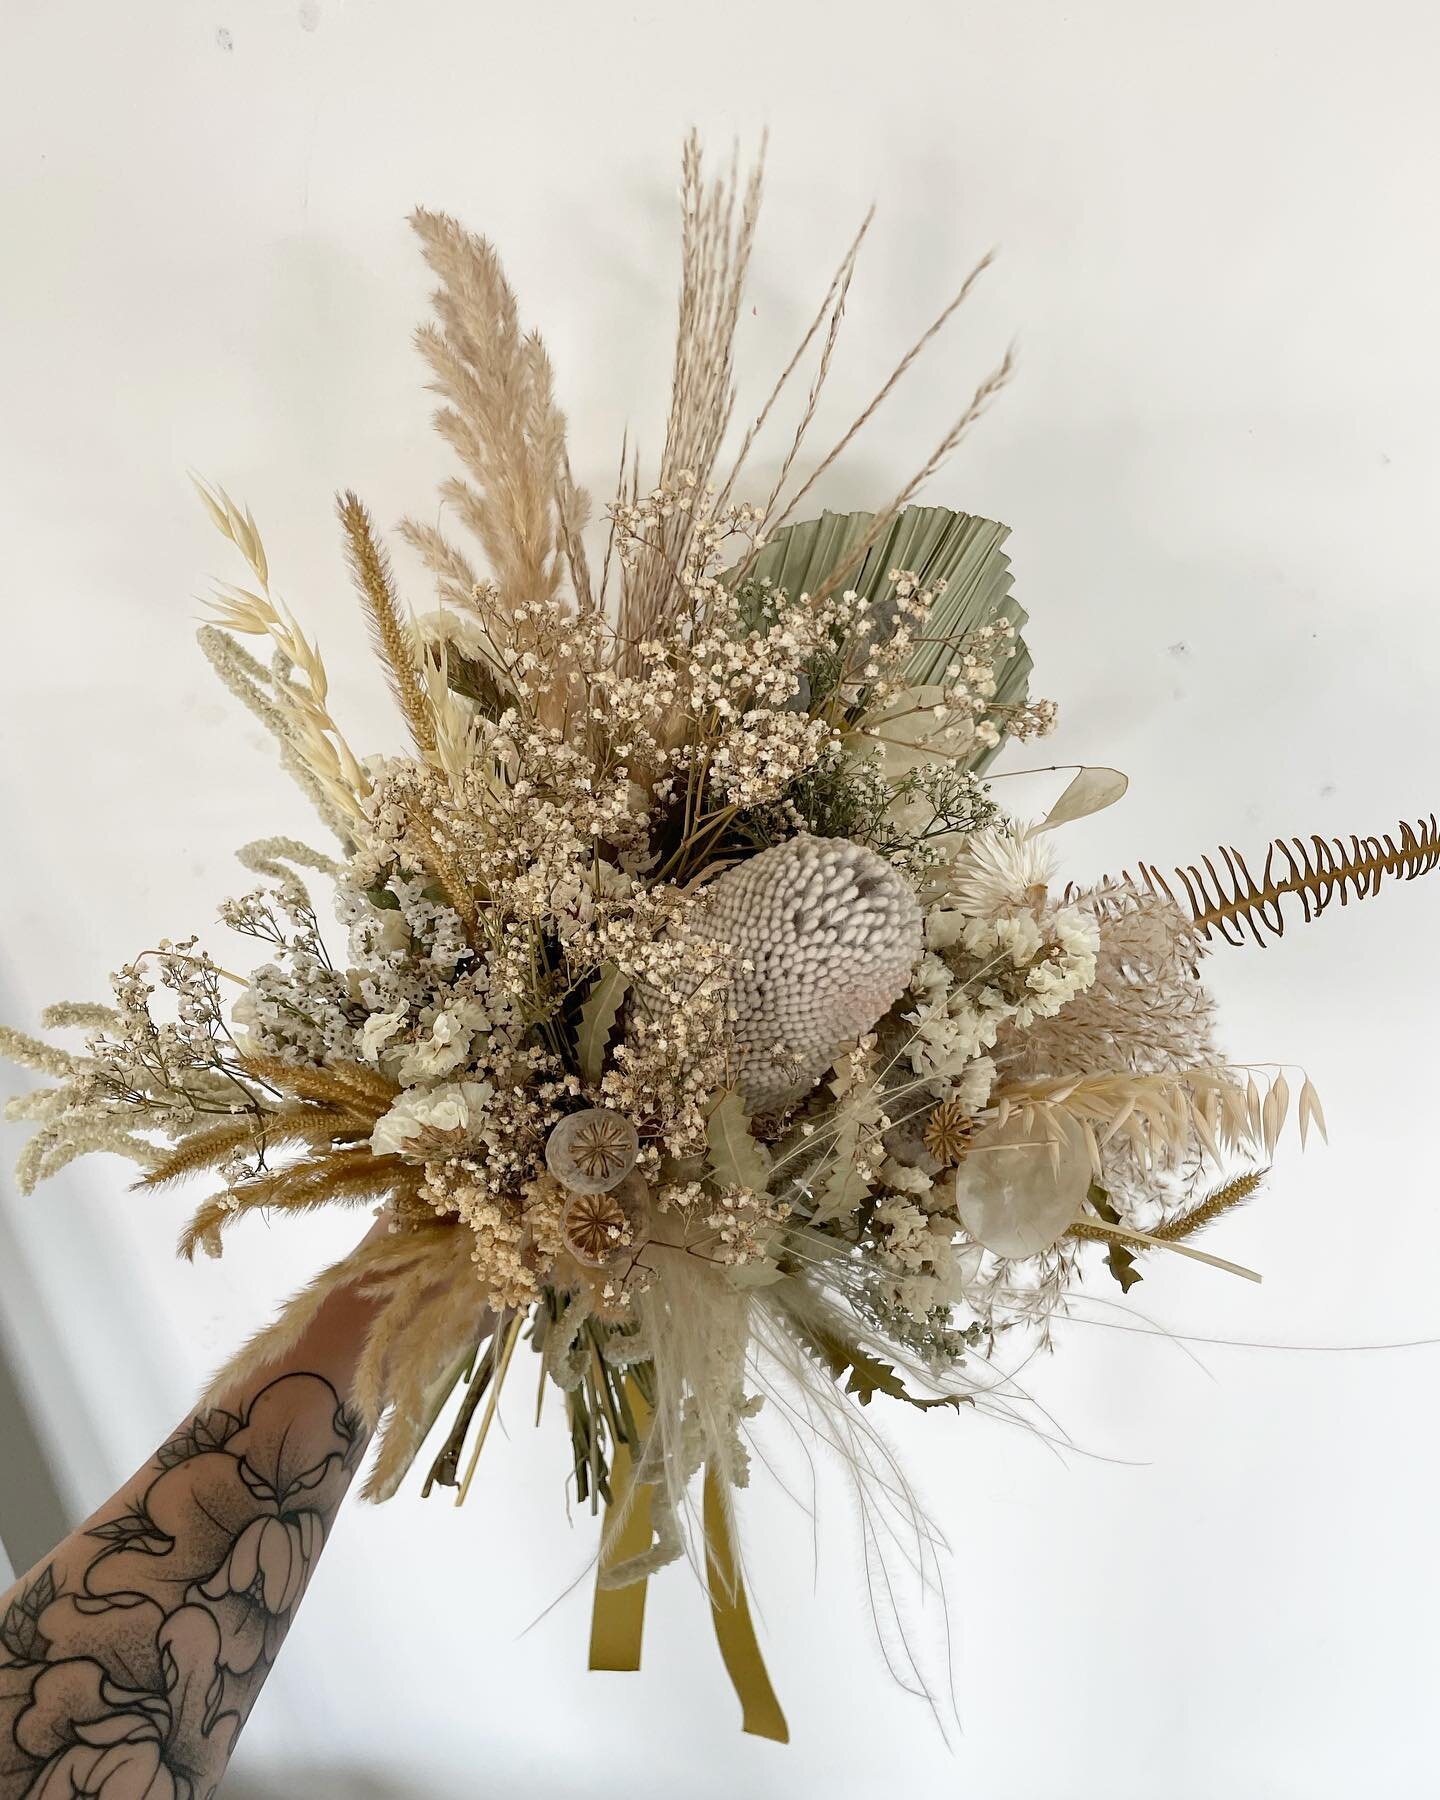 all dried Bridal 🤍 hitting wedding season all textured and soft ☁️ ?! ☁️ it&rsquo;s a busy one&hellip;..chaotic weeks of long days, early starts and approx 56272 hours of admin, prep and ordering flowers but weddings are our FAVE&hellip;.🌾